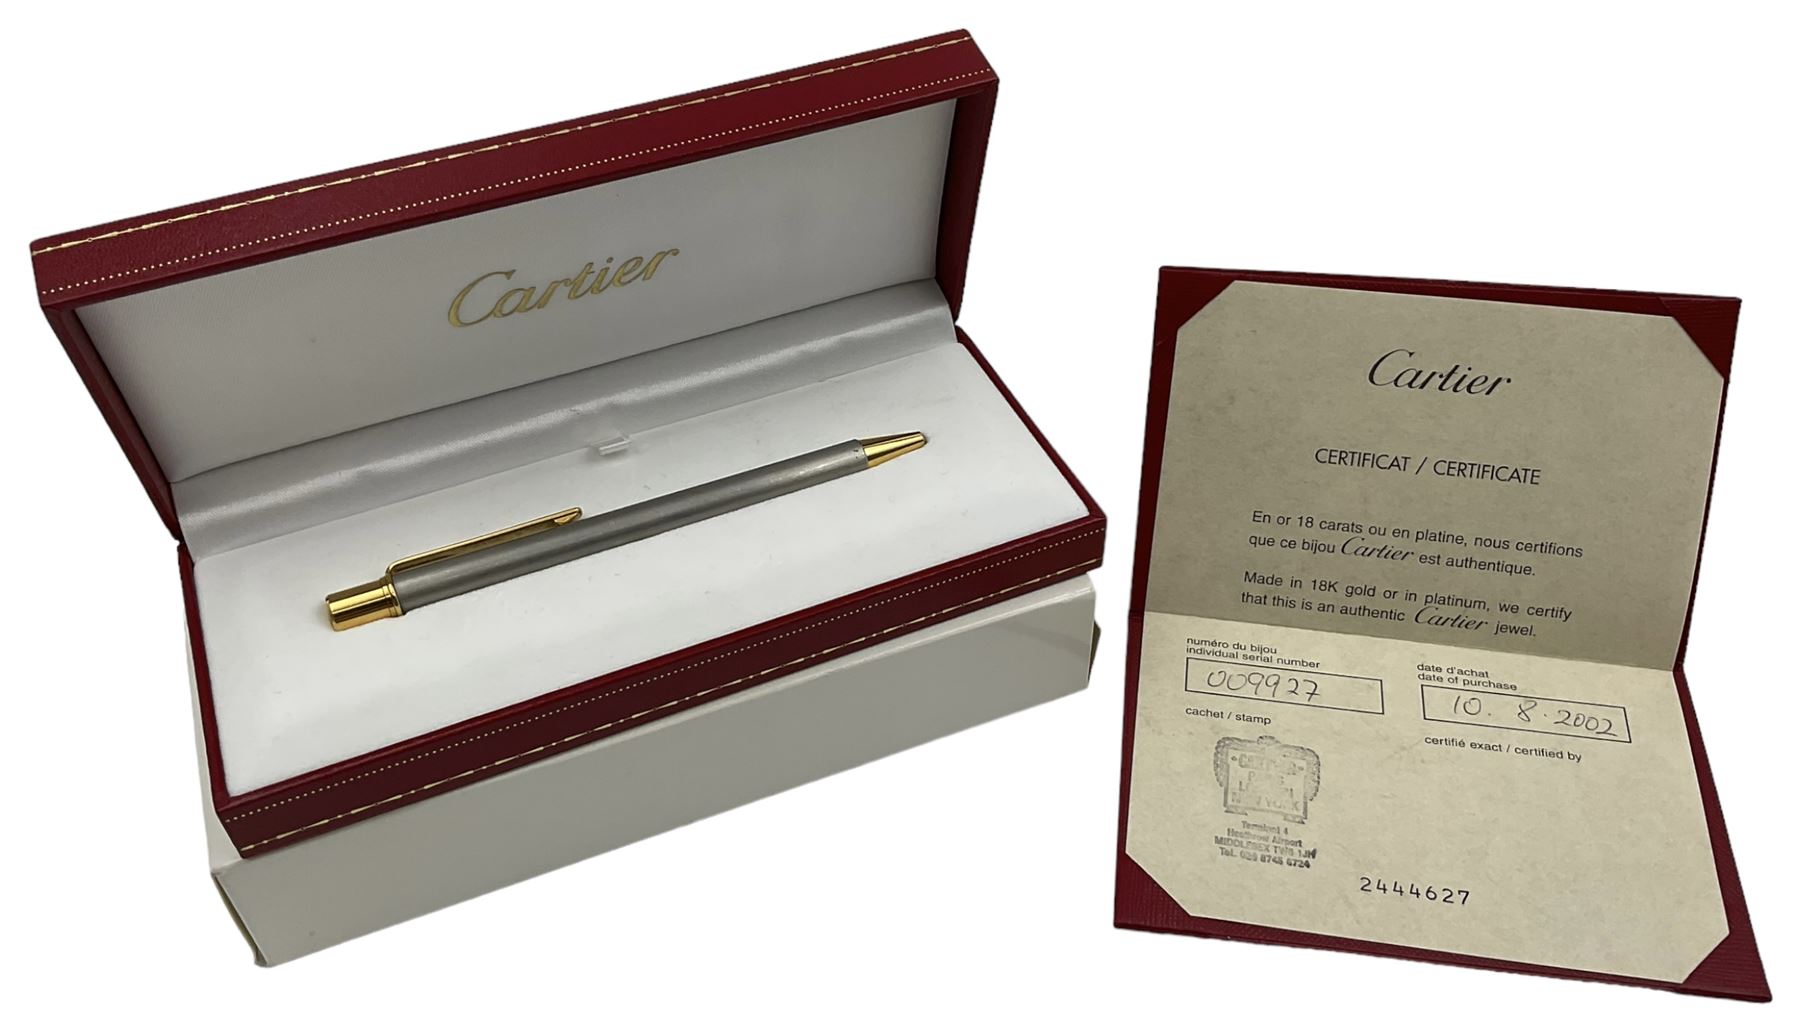 Cartier ball point pen - Image 2 of 3